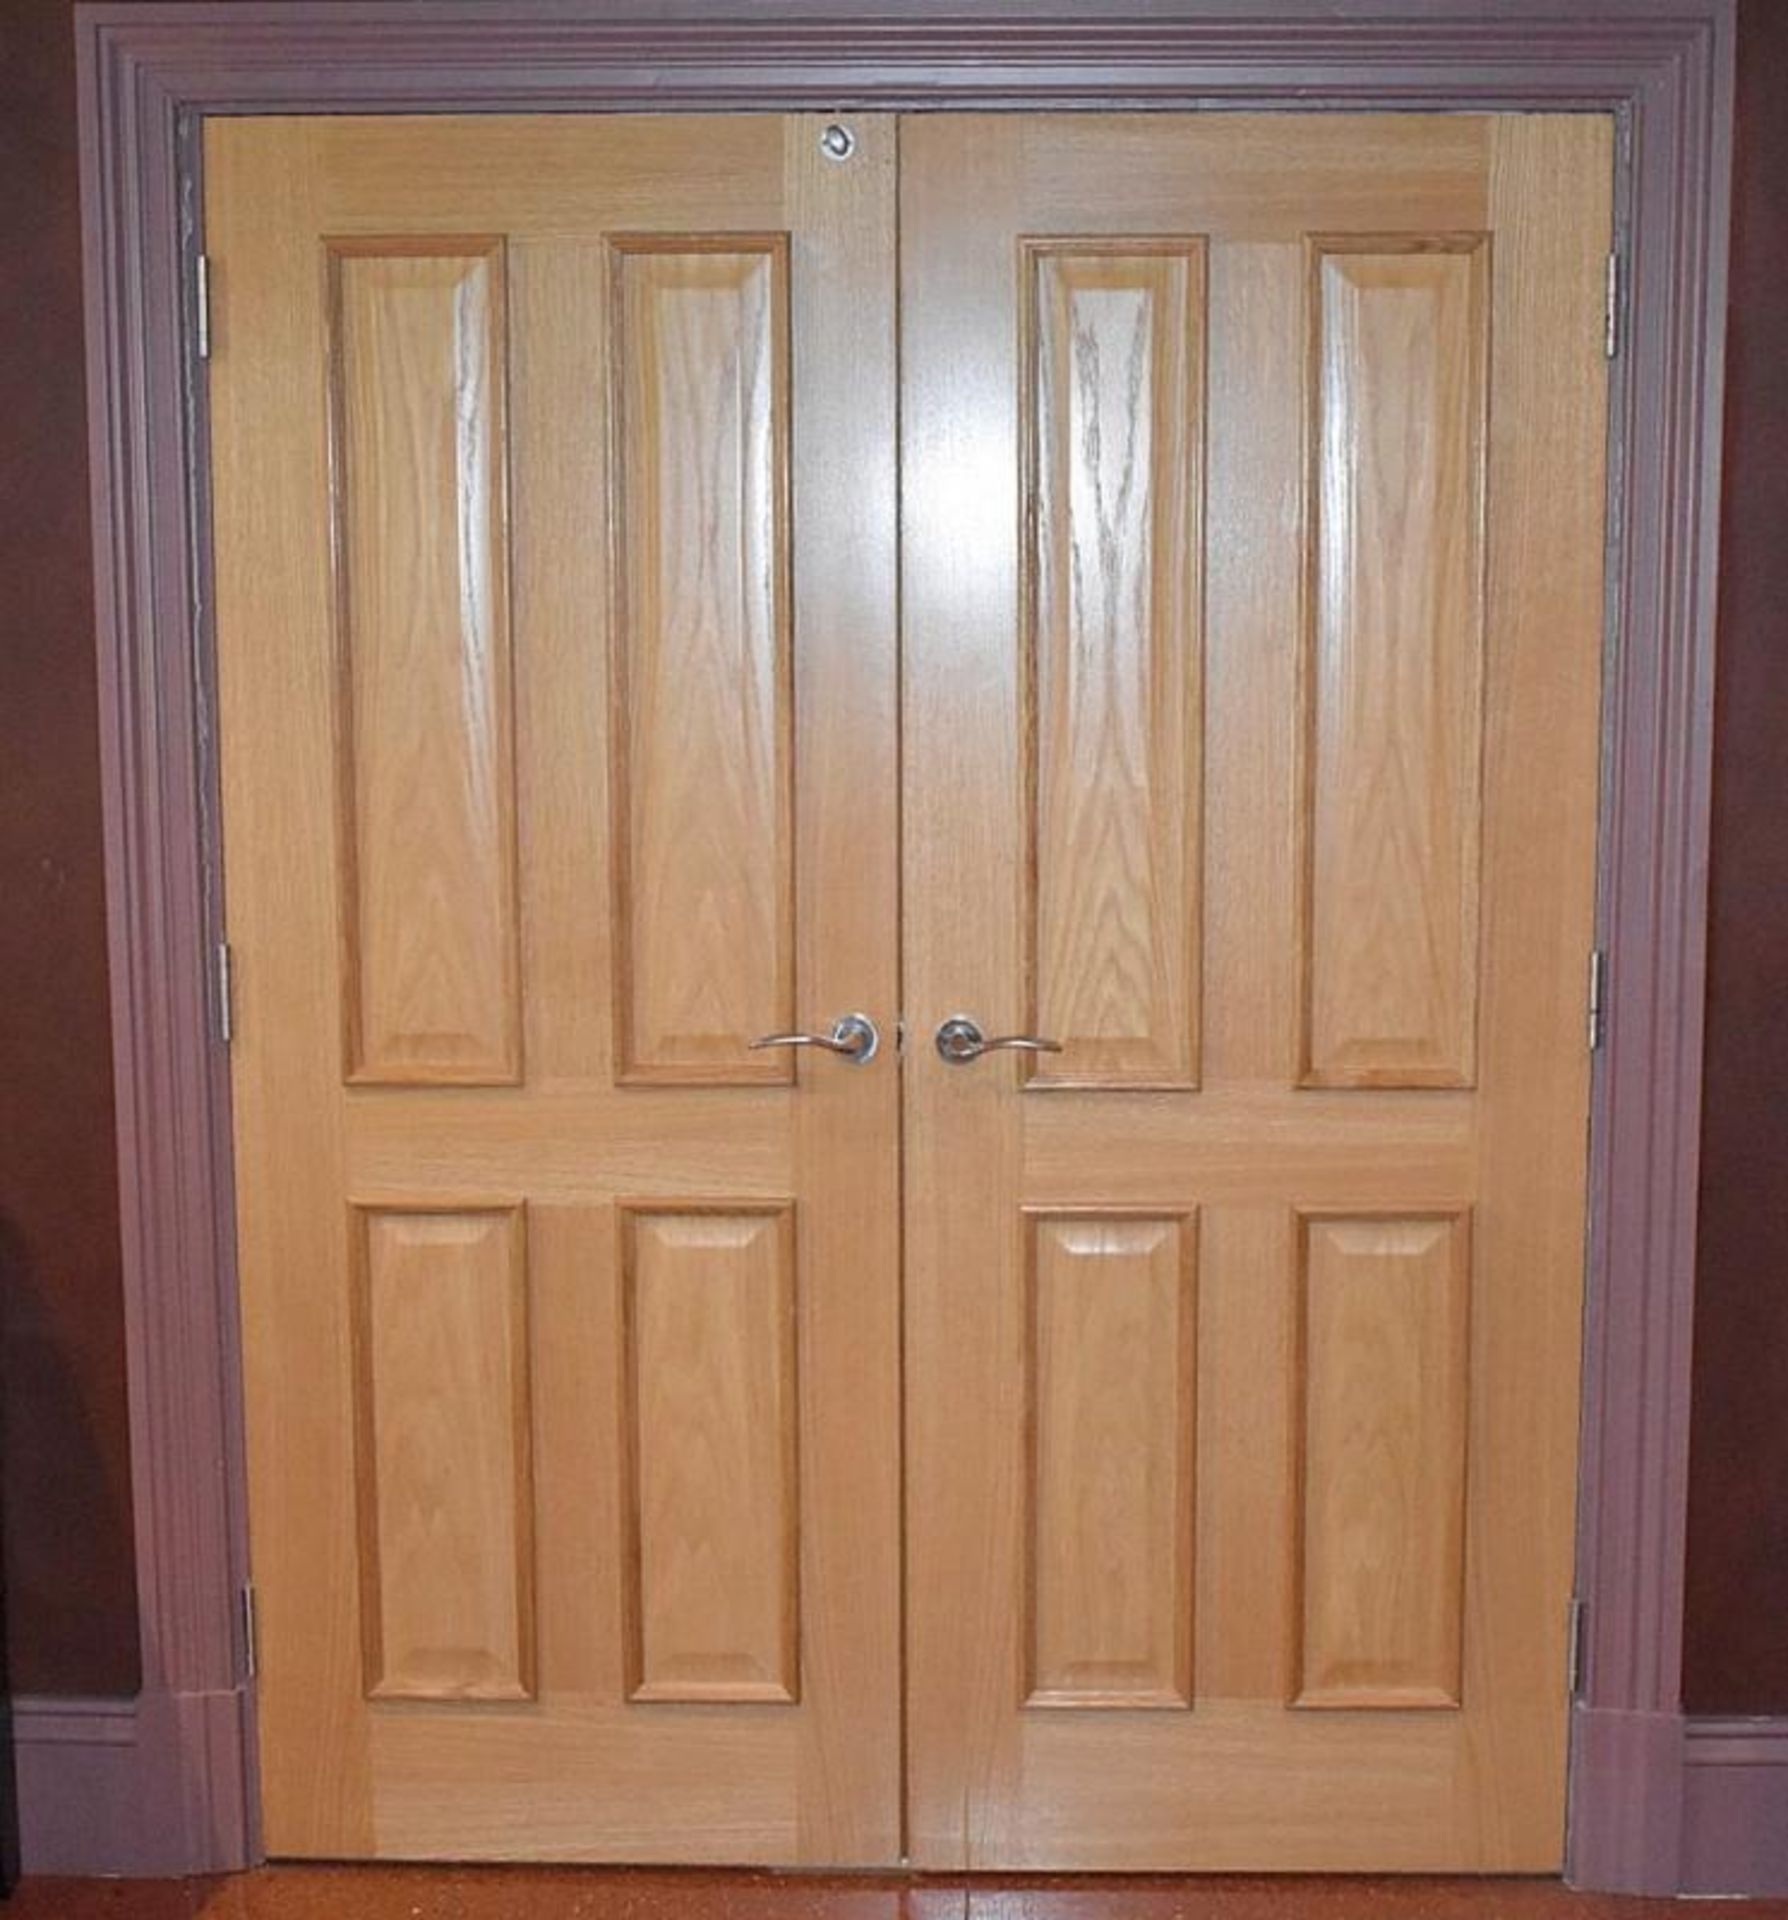 A Pair Of High Quality Internal Wooden Doors - Dimensions Of Each: H200 x W75 x 7cm - Ref: ABR015 /